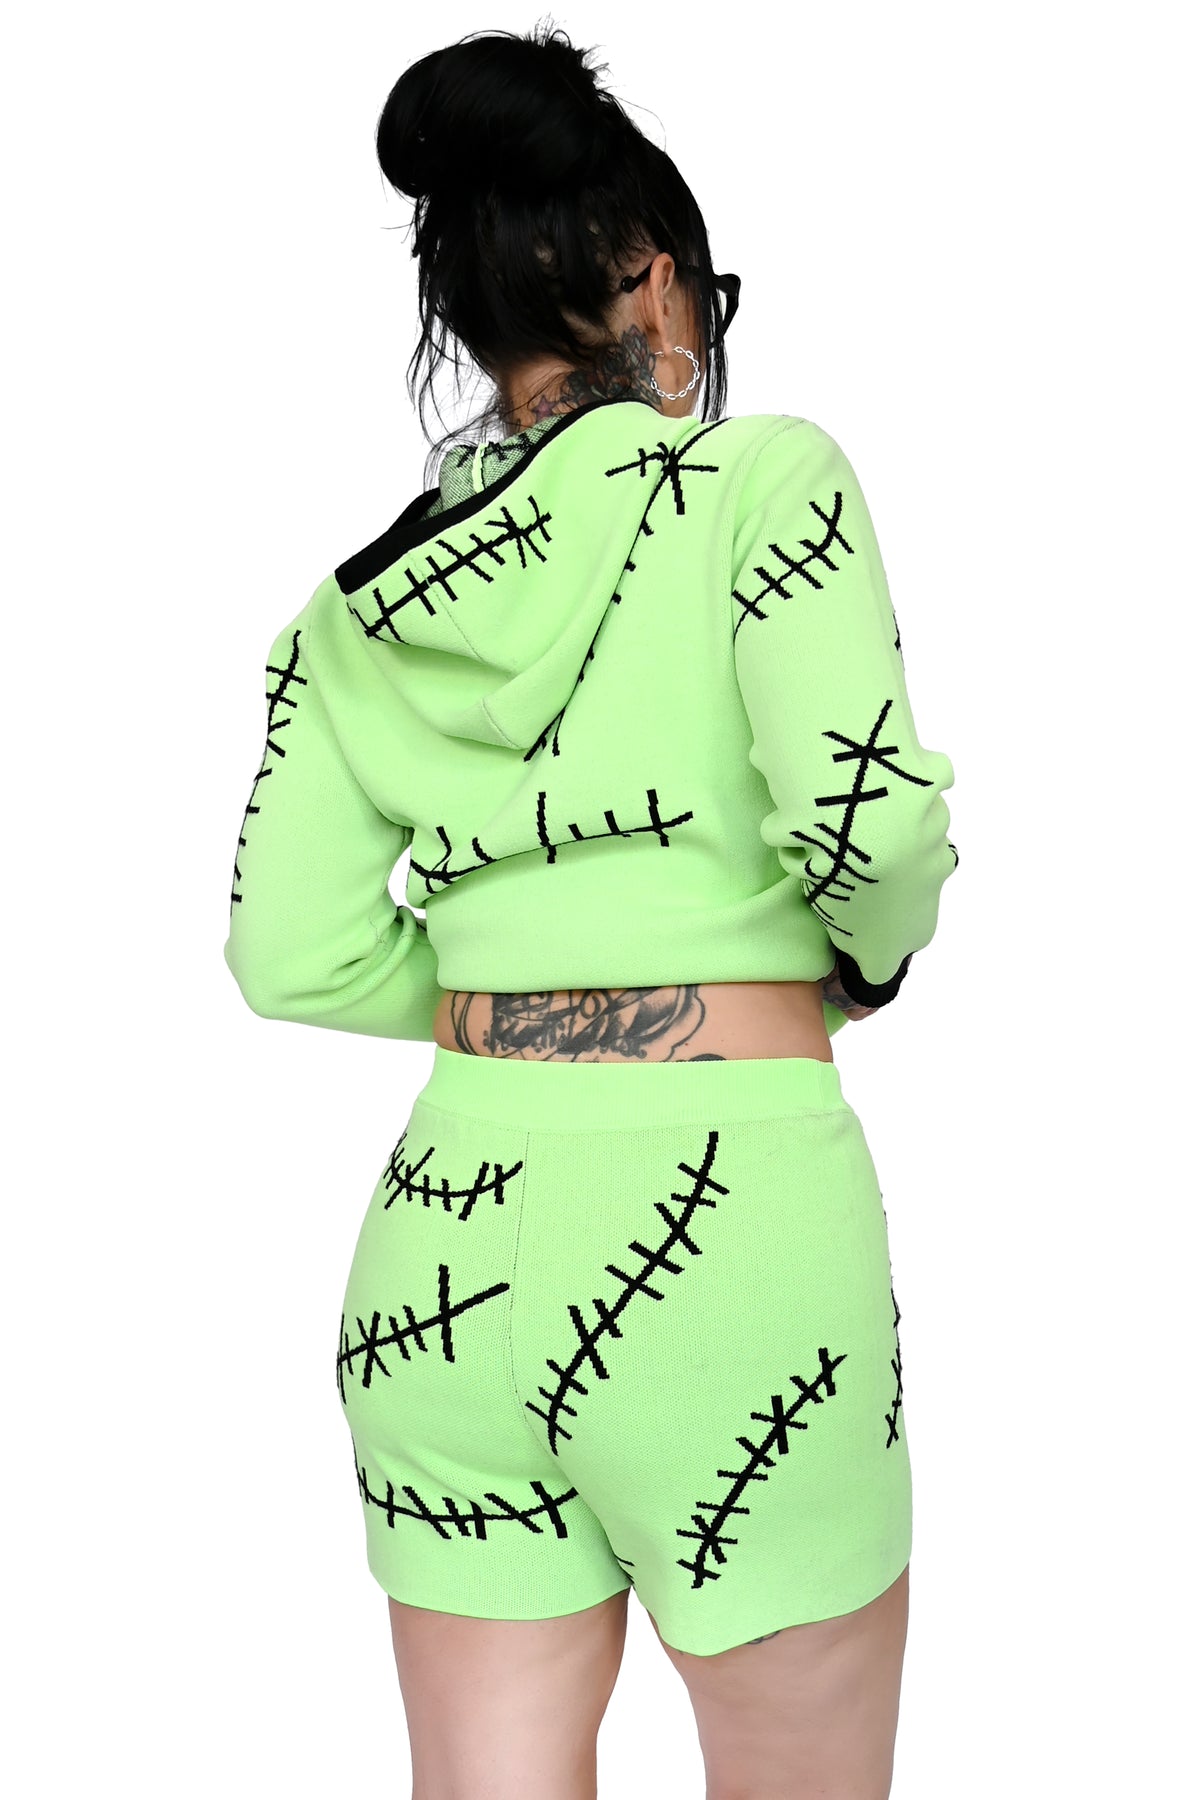 The Boogie Man Shorts - Green Glow in the Dark!